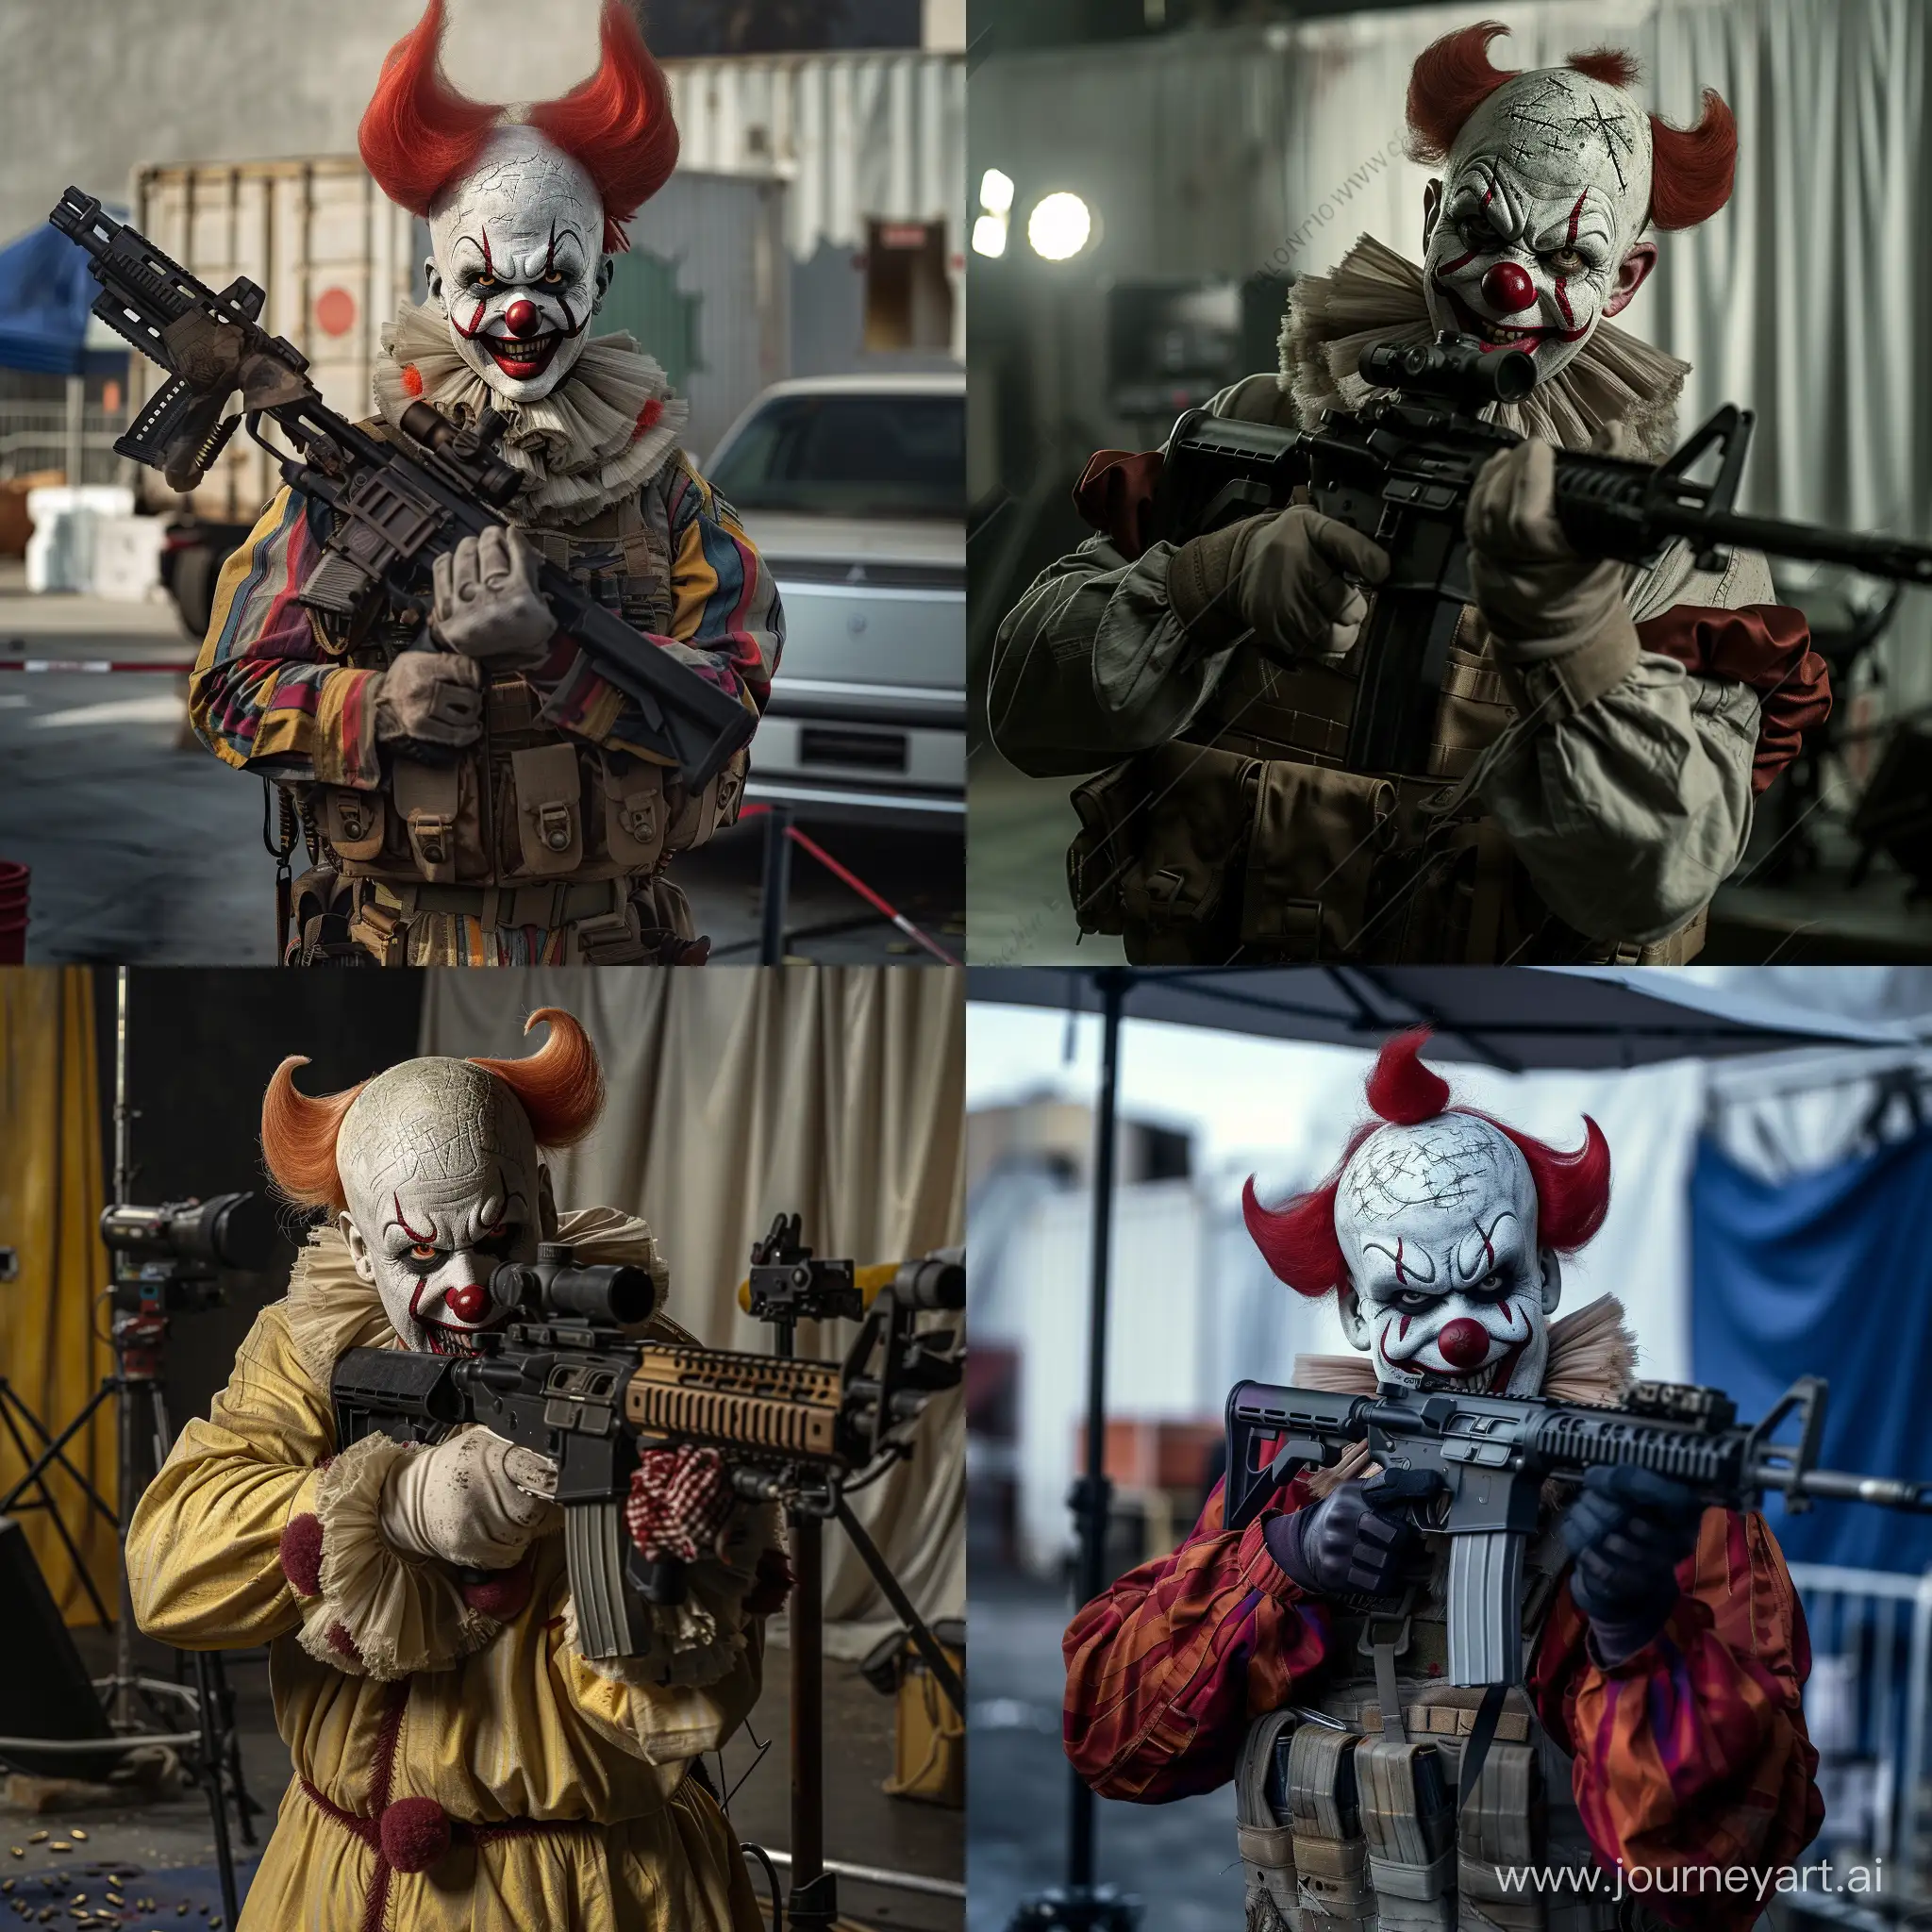 photo-realistic, an evil looking clown holds a rifle on a Hollywood film set